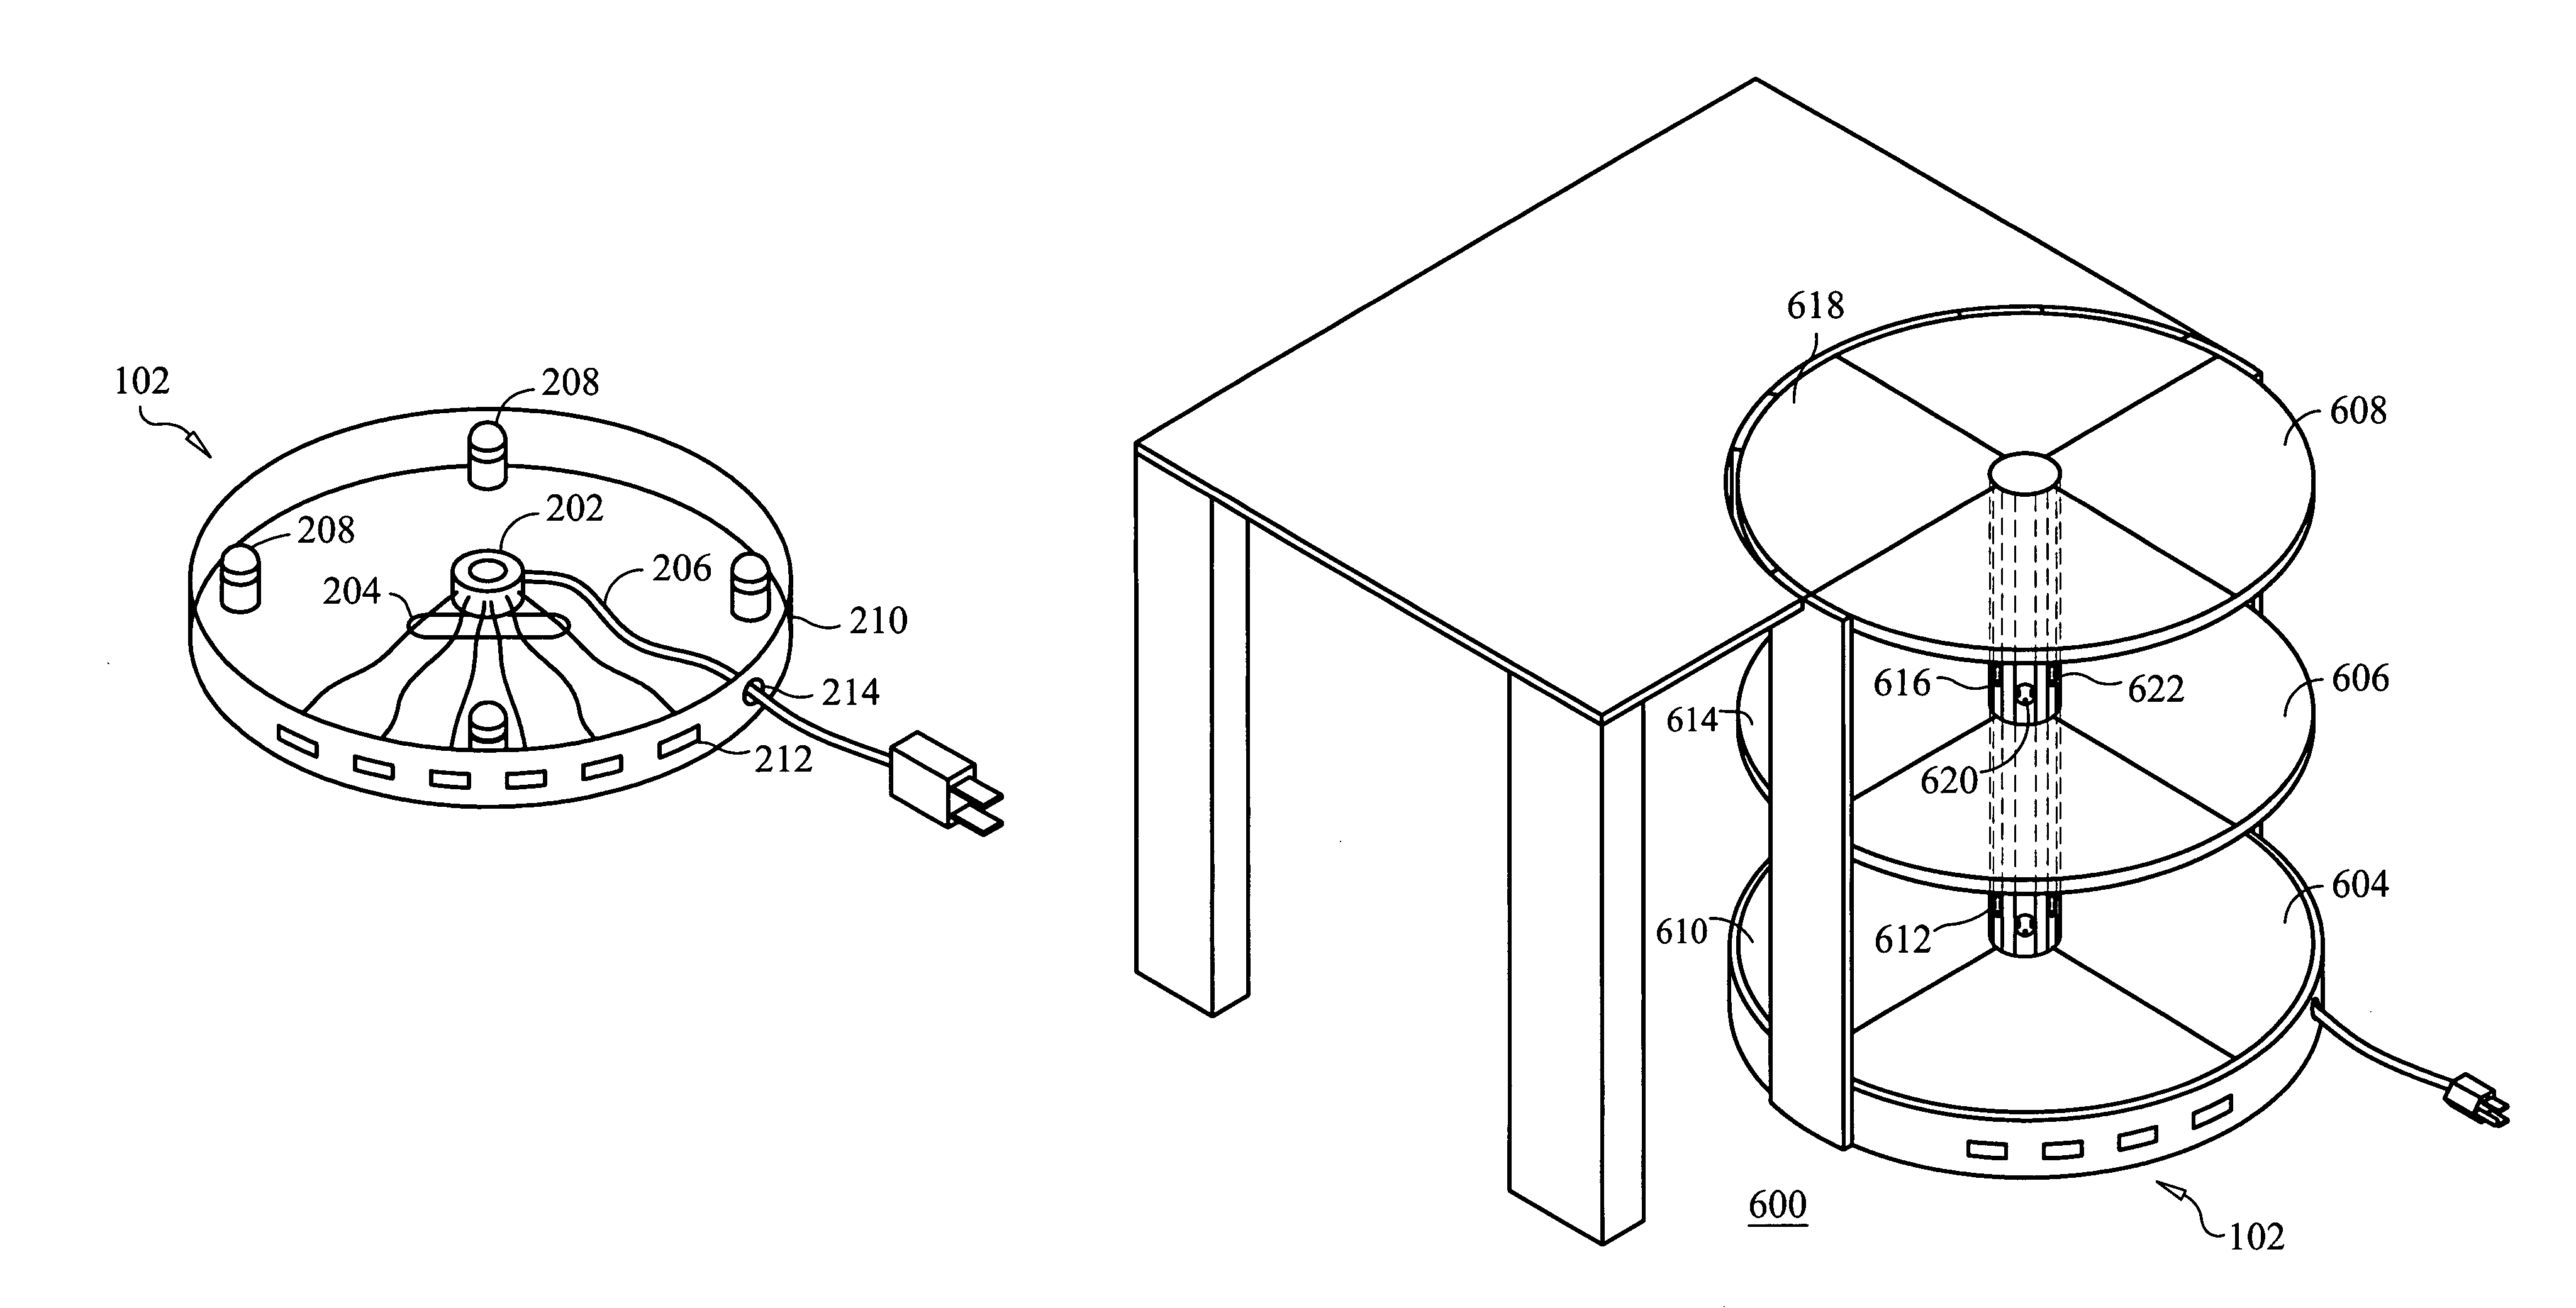 Continuously rotatable electronic-device organizer